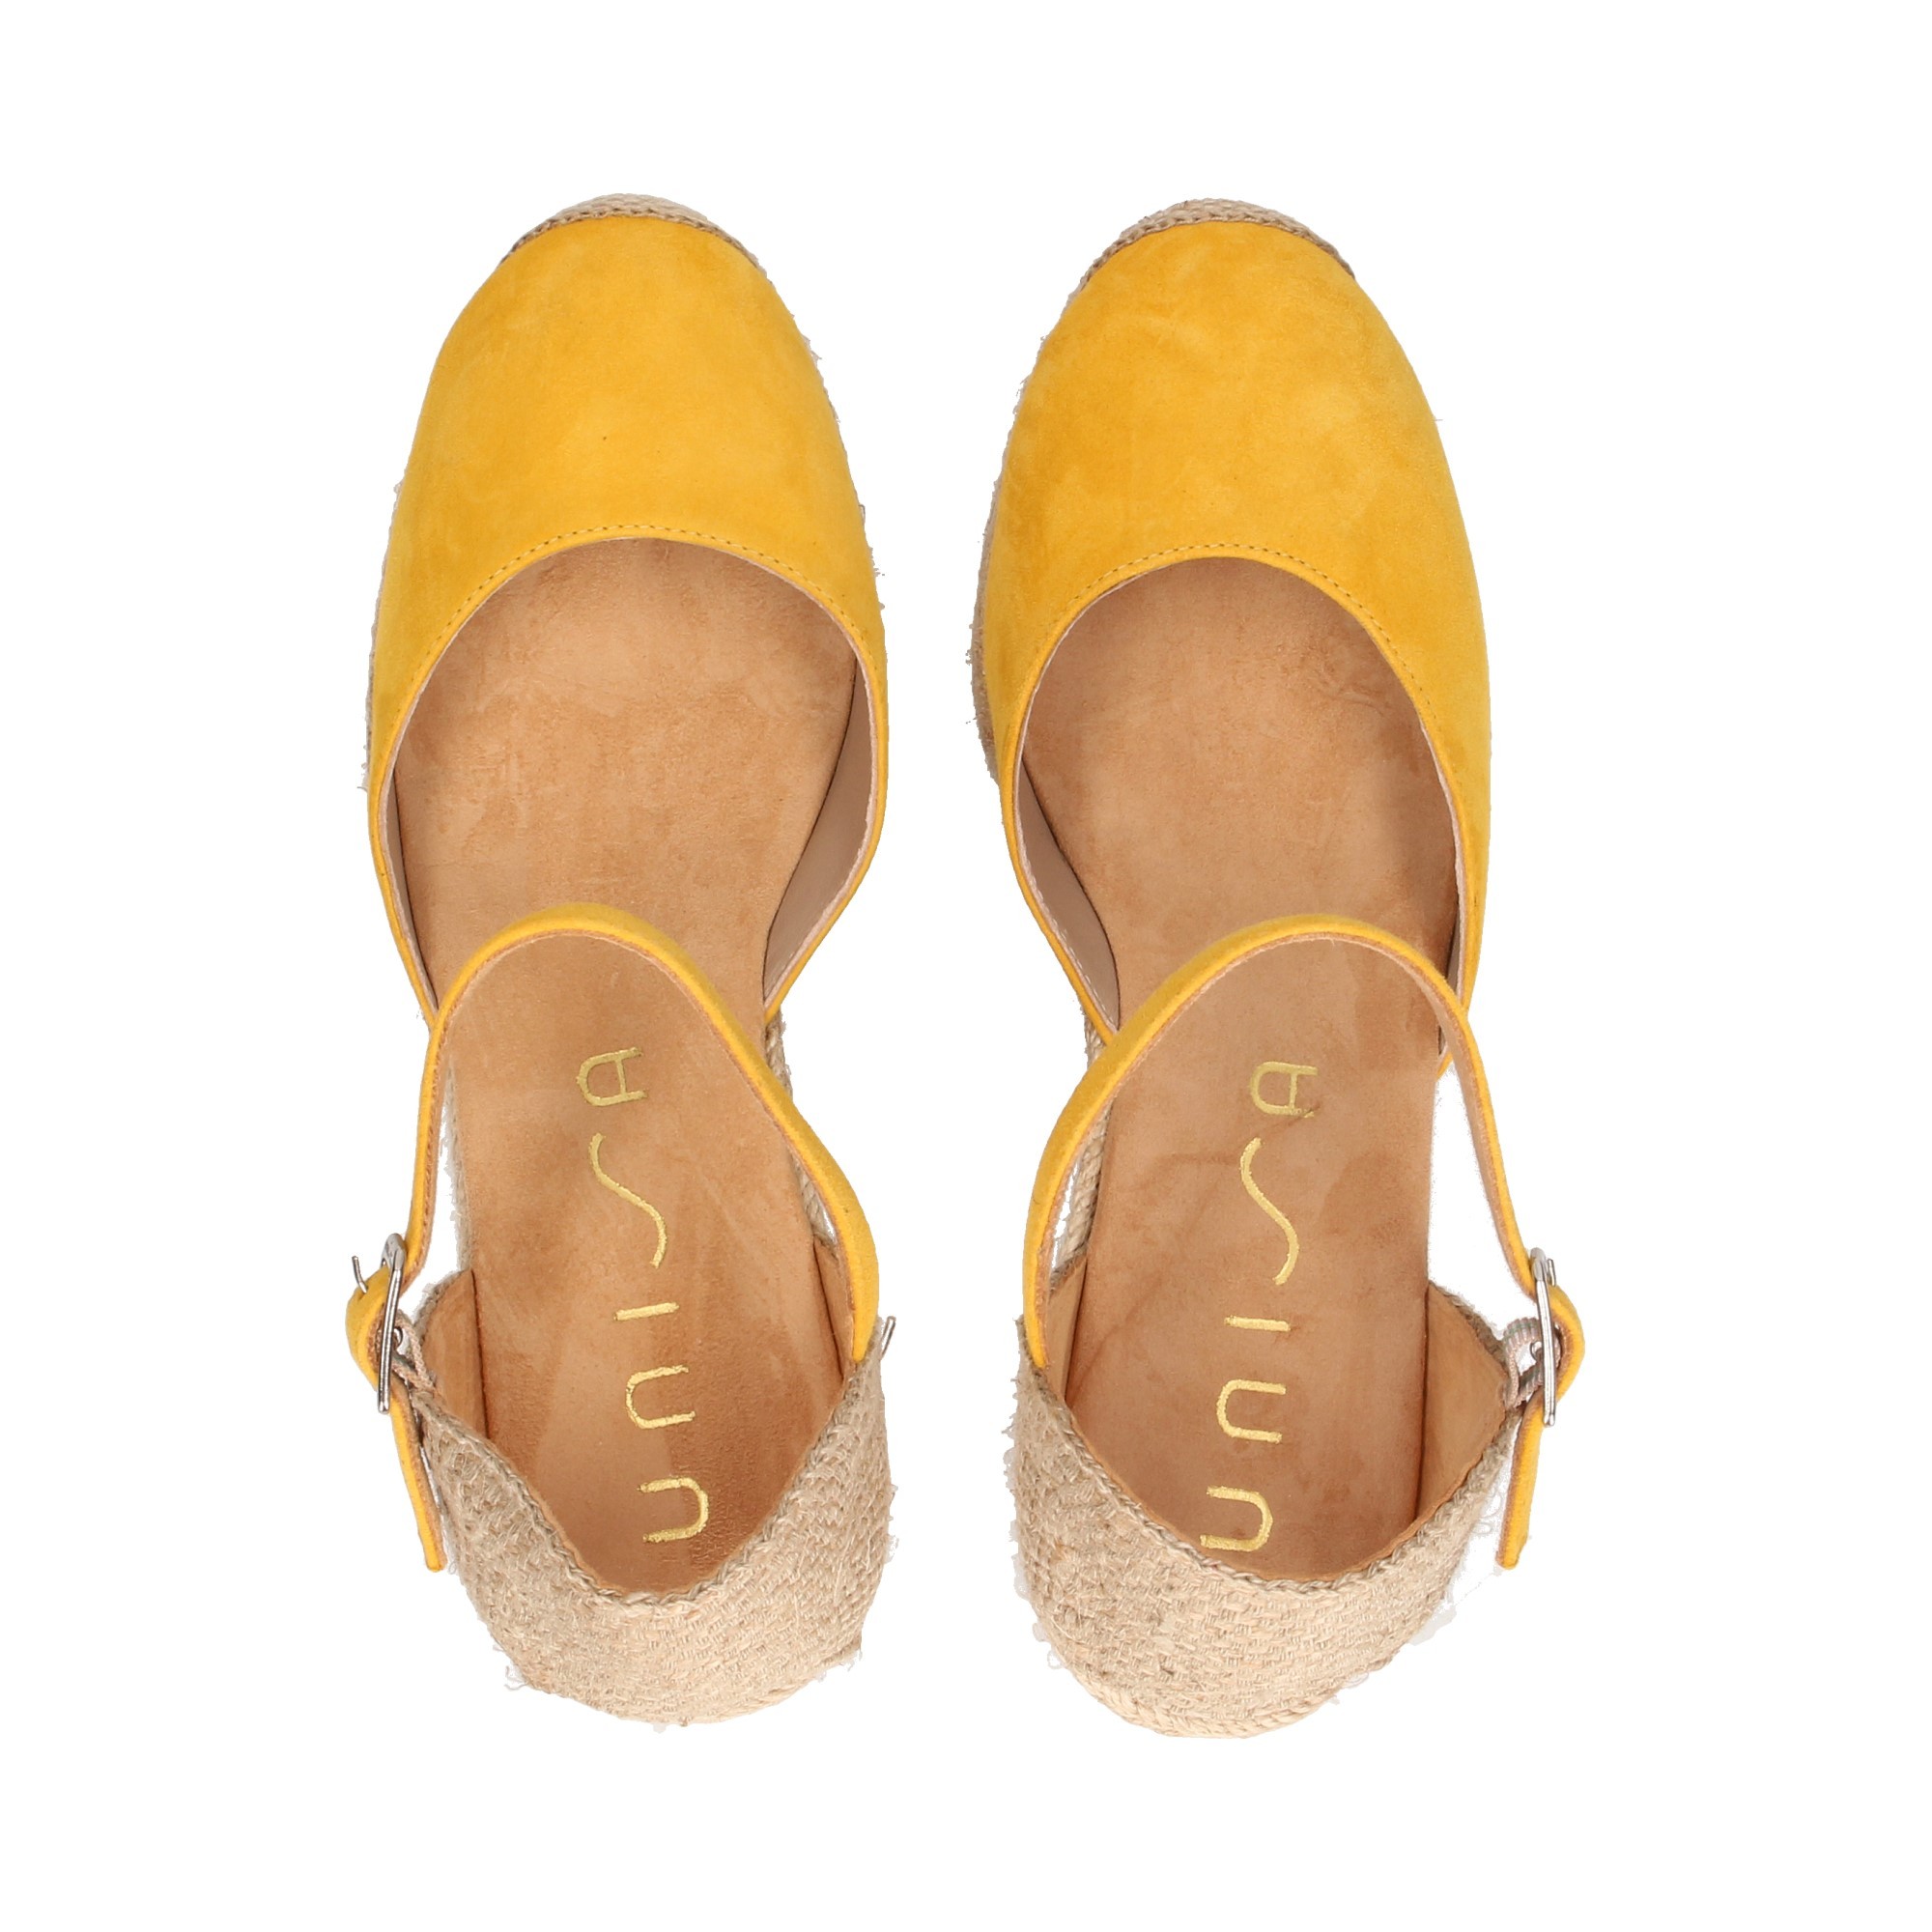 espadrille-wedge-suede-yellow